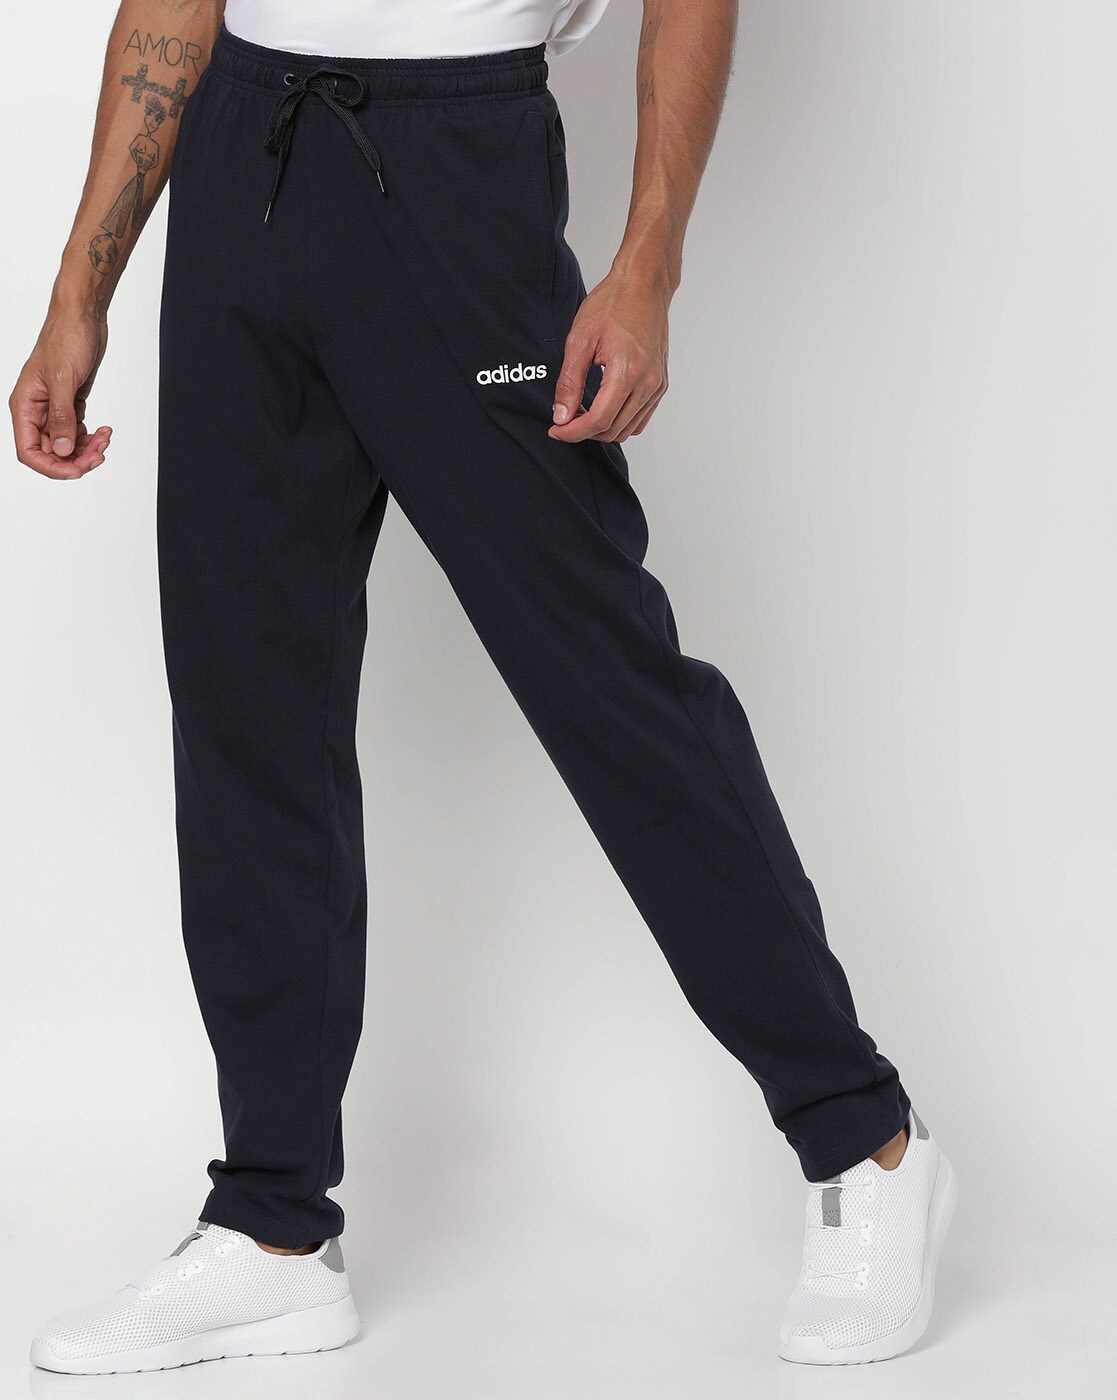 26+ Adidas Navy Blue Track Pants Pictures